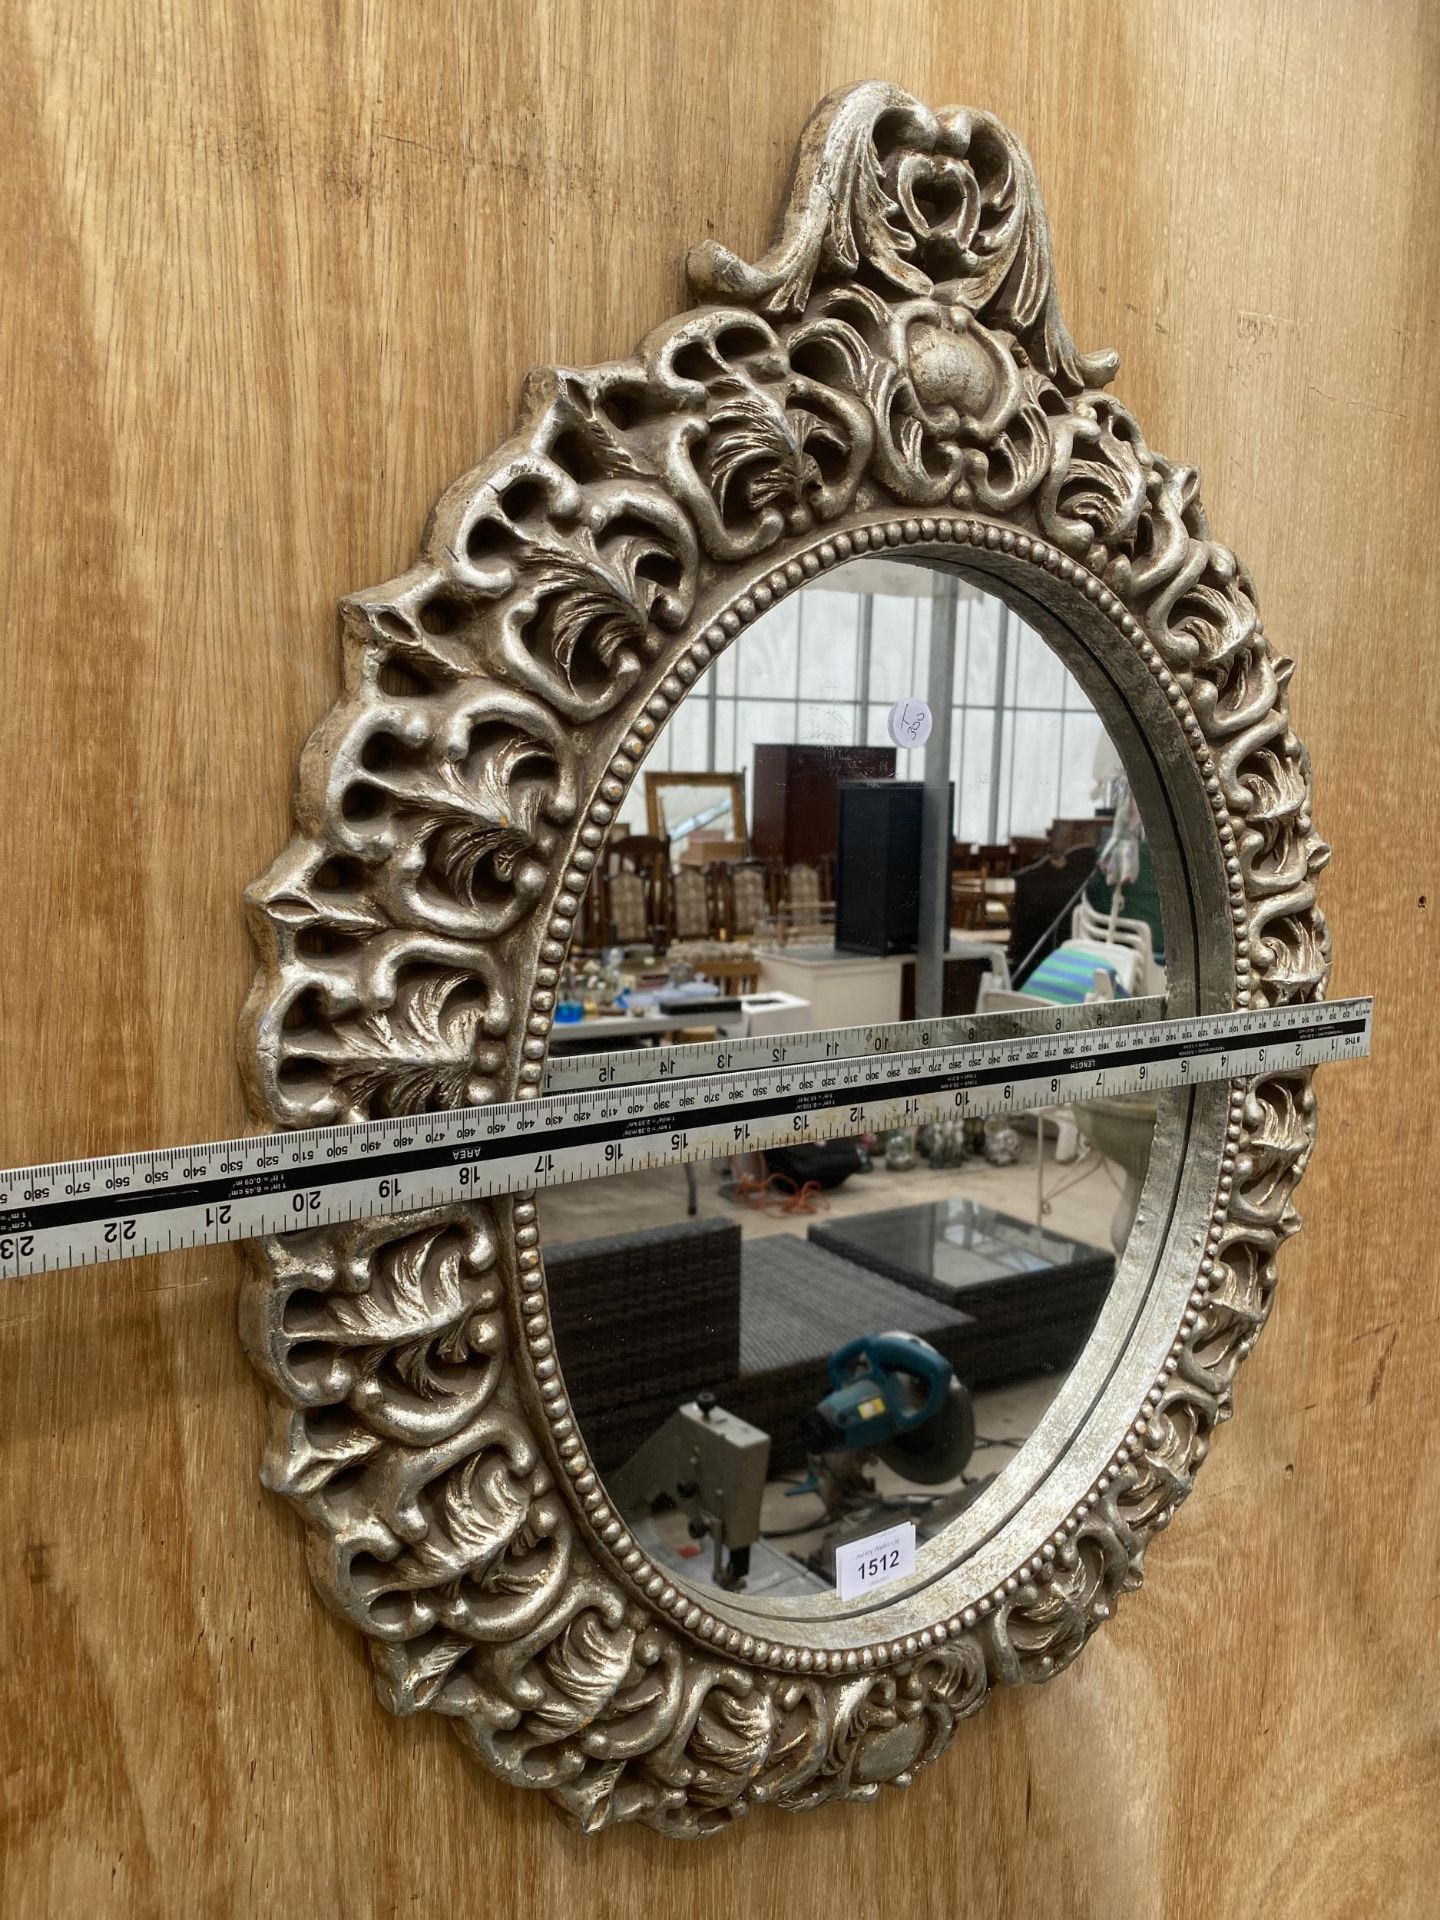 A DECORATIVE SILVER GILT FRAMED WALL MIRROR - Image 3 of 3